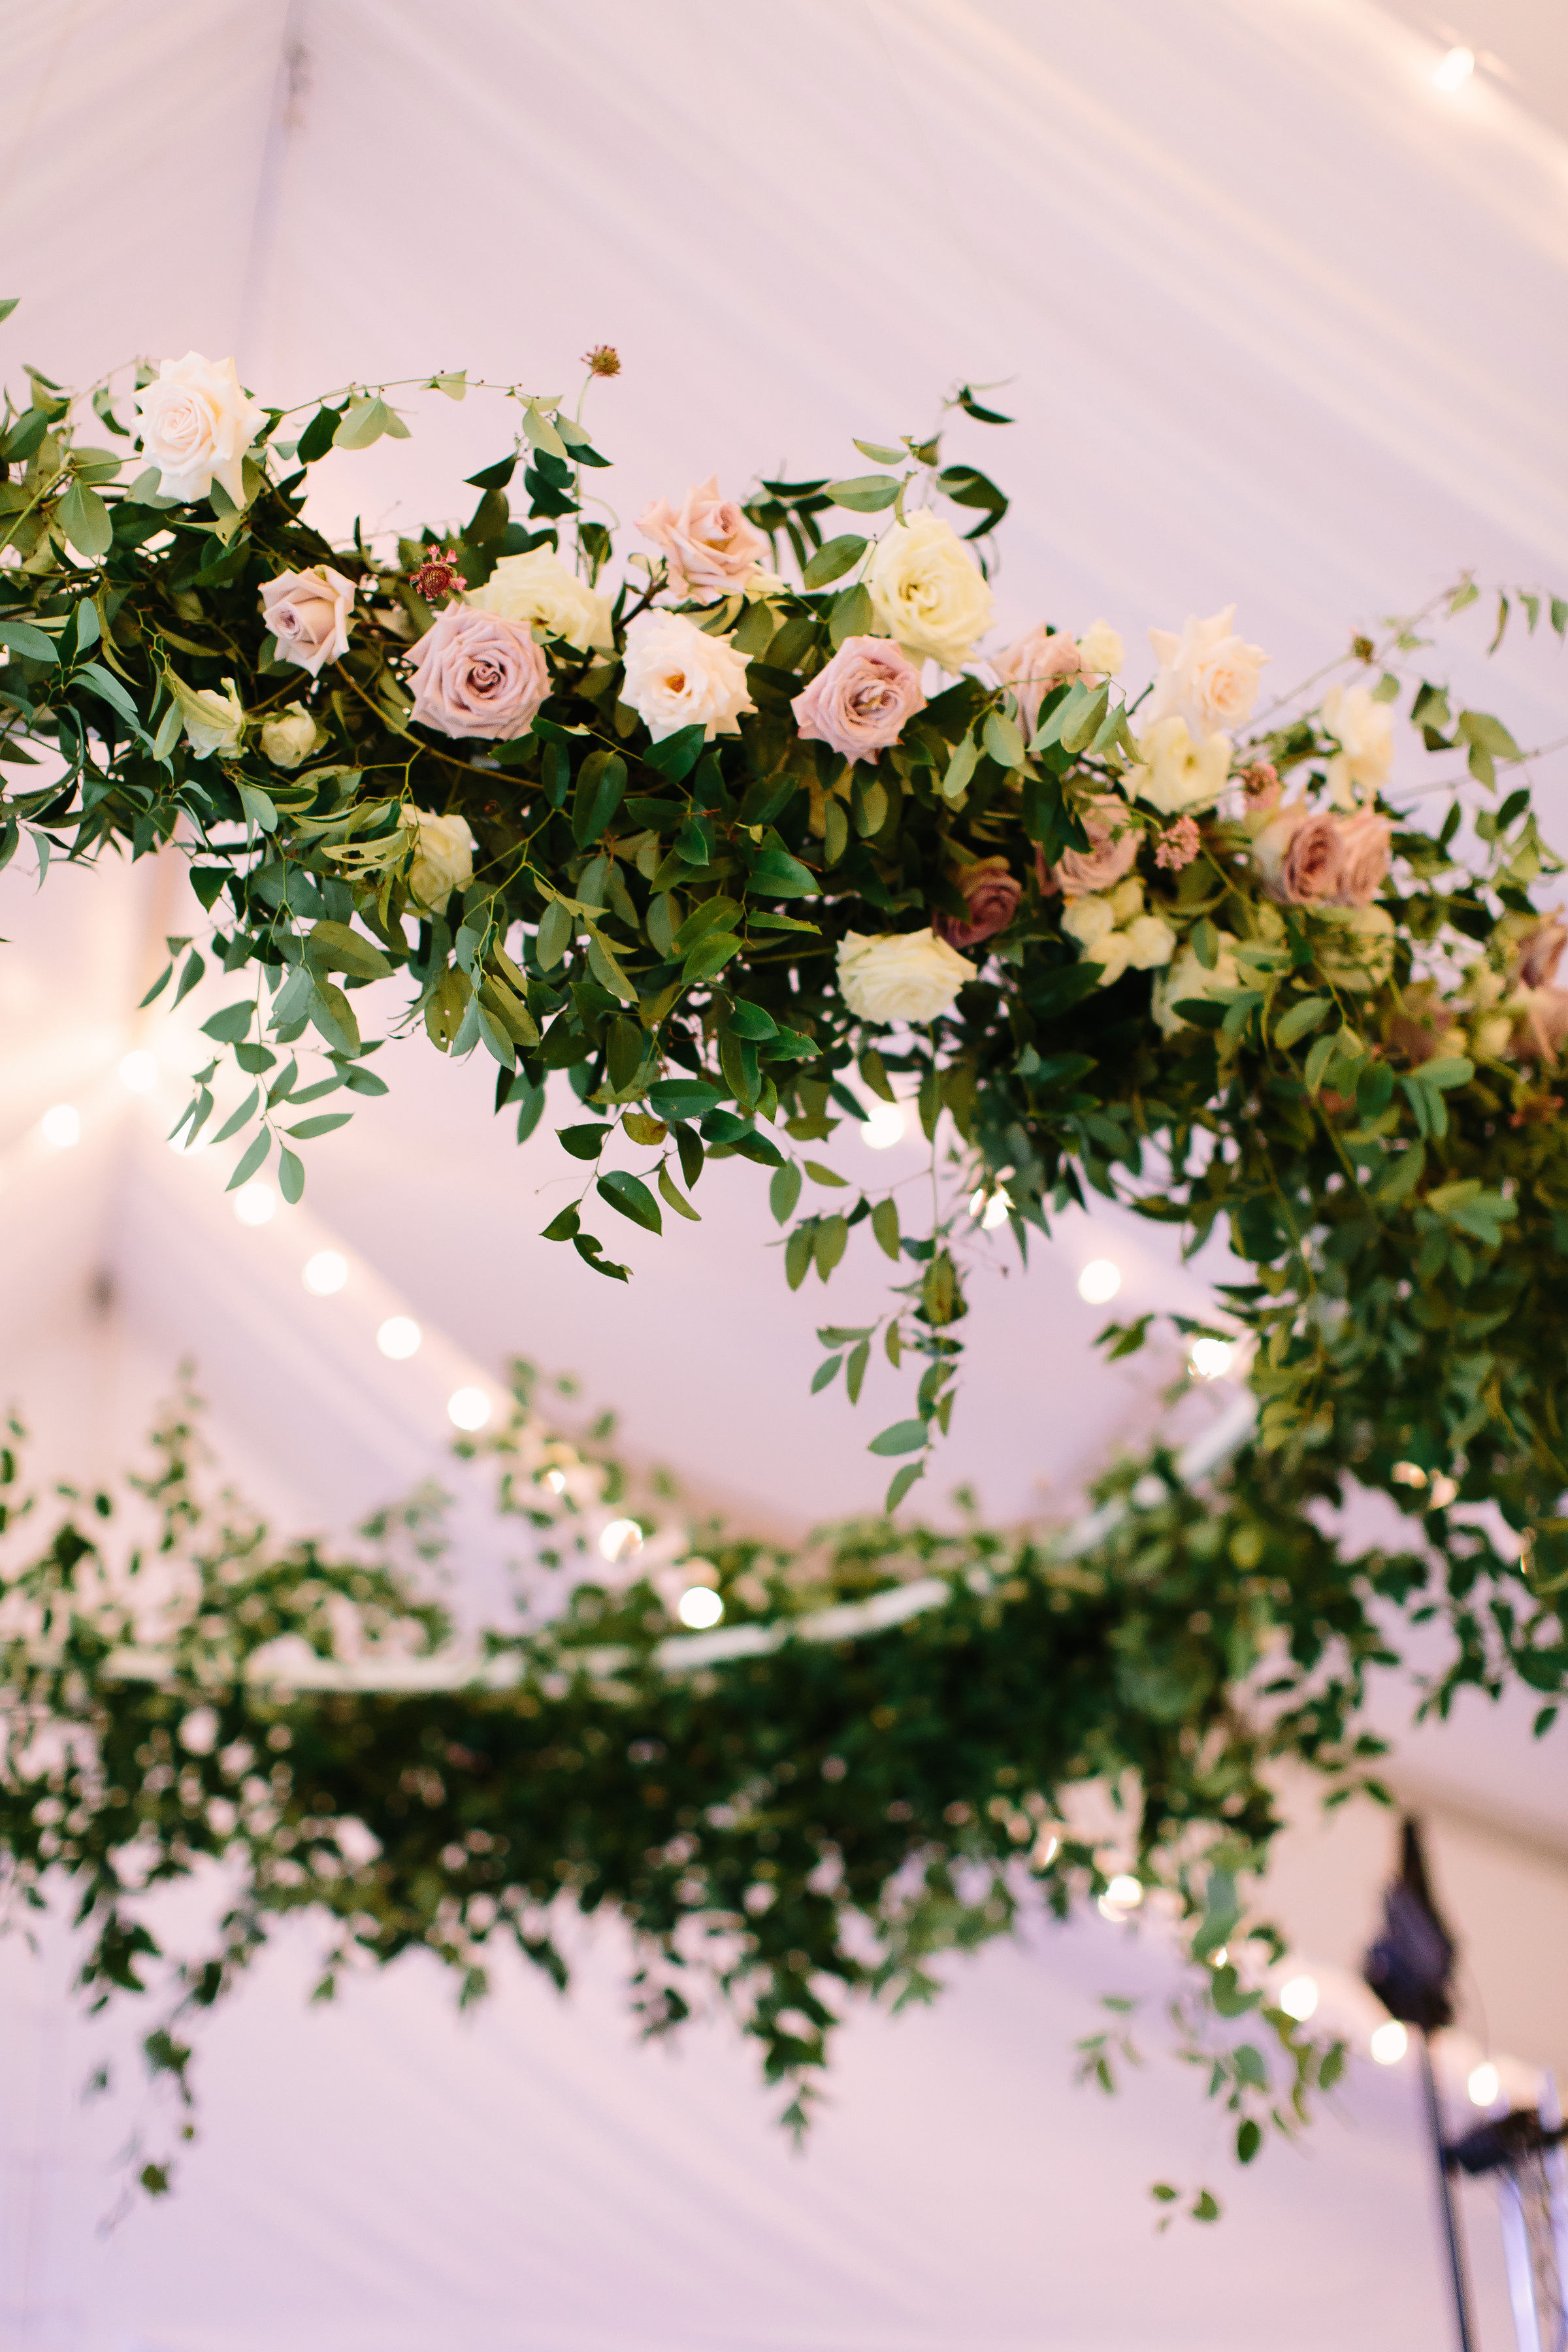 8 foot floral wreath with natural greenery and mauve and cream garden roses // Nashville Wedding Florist